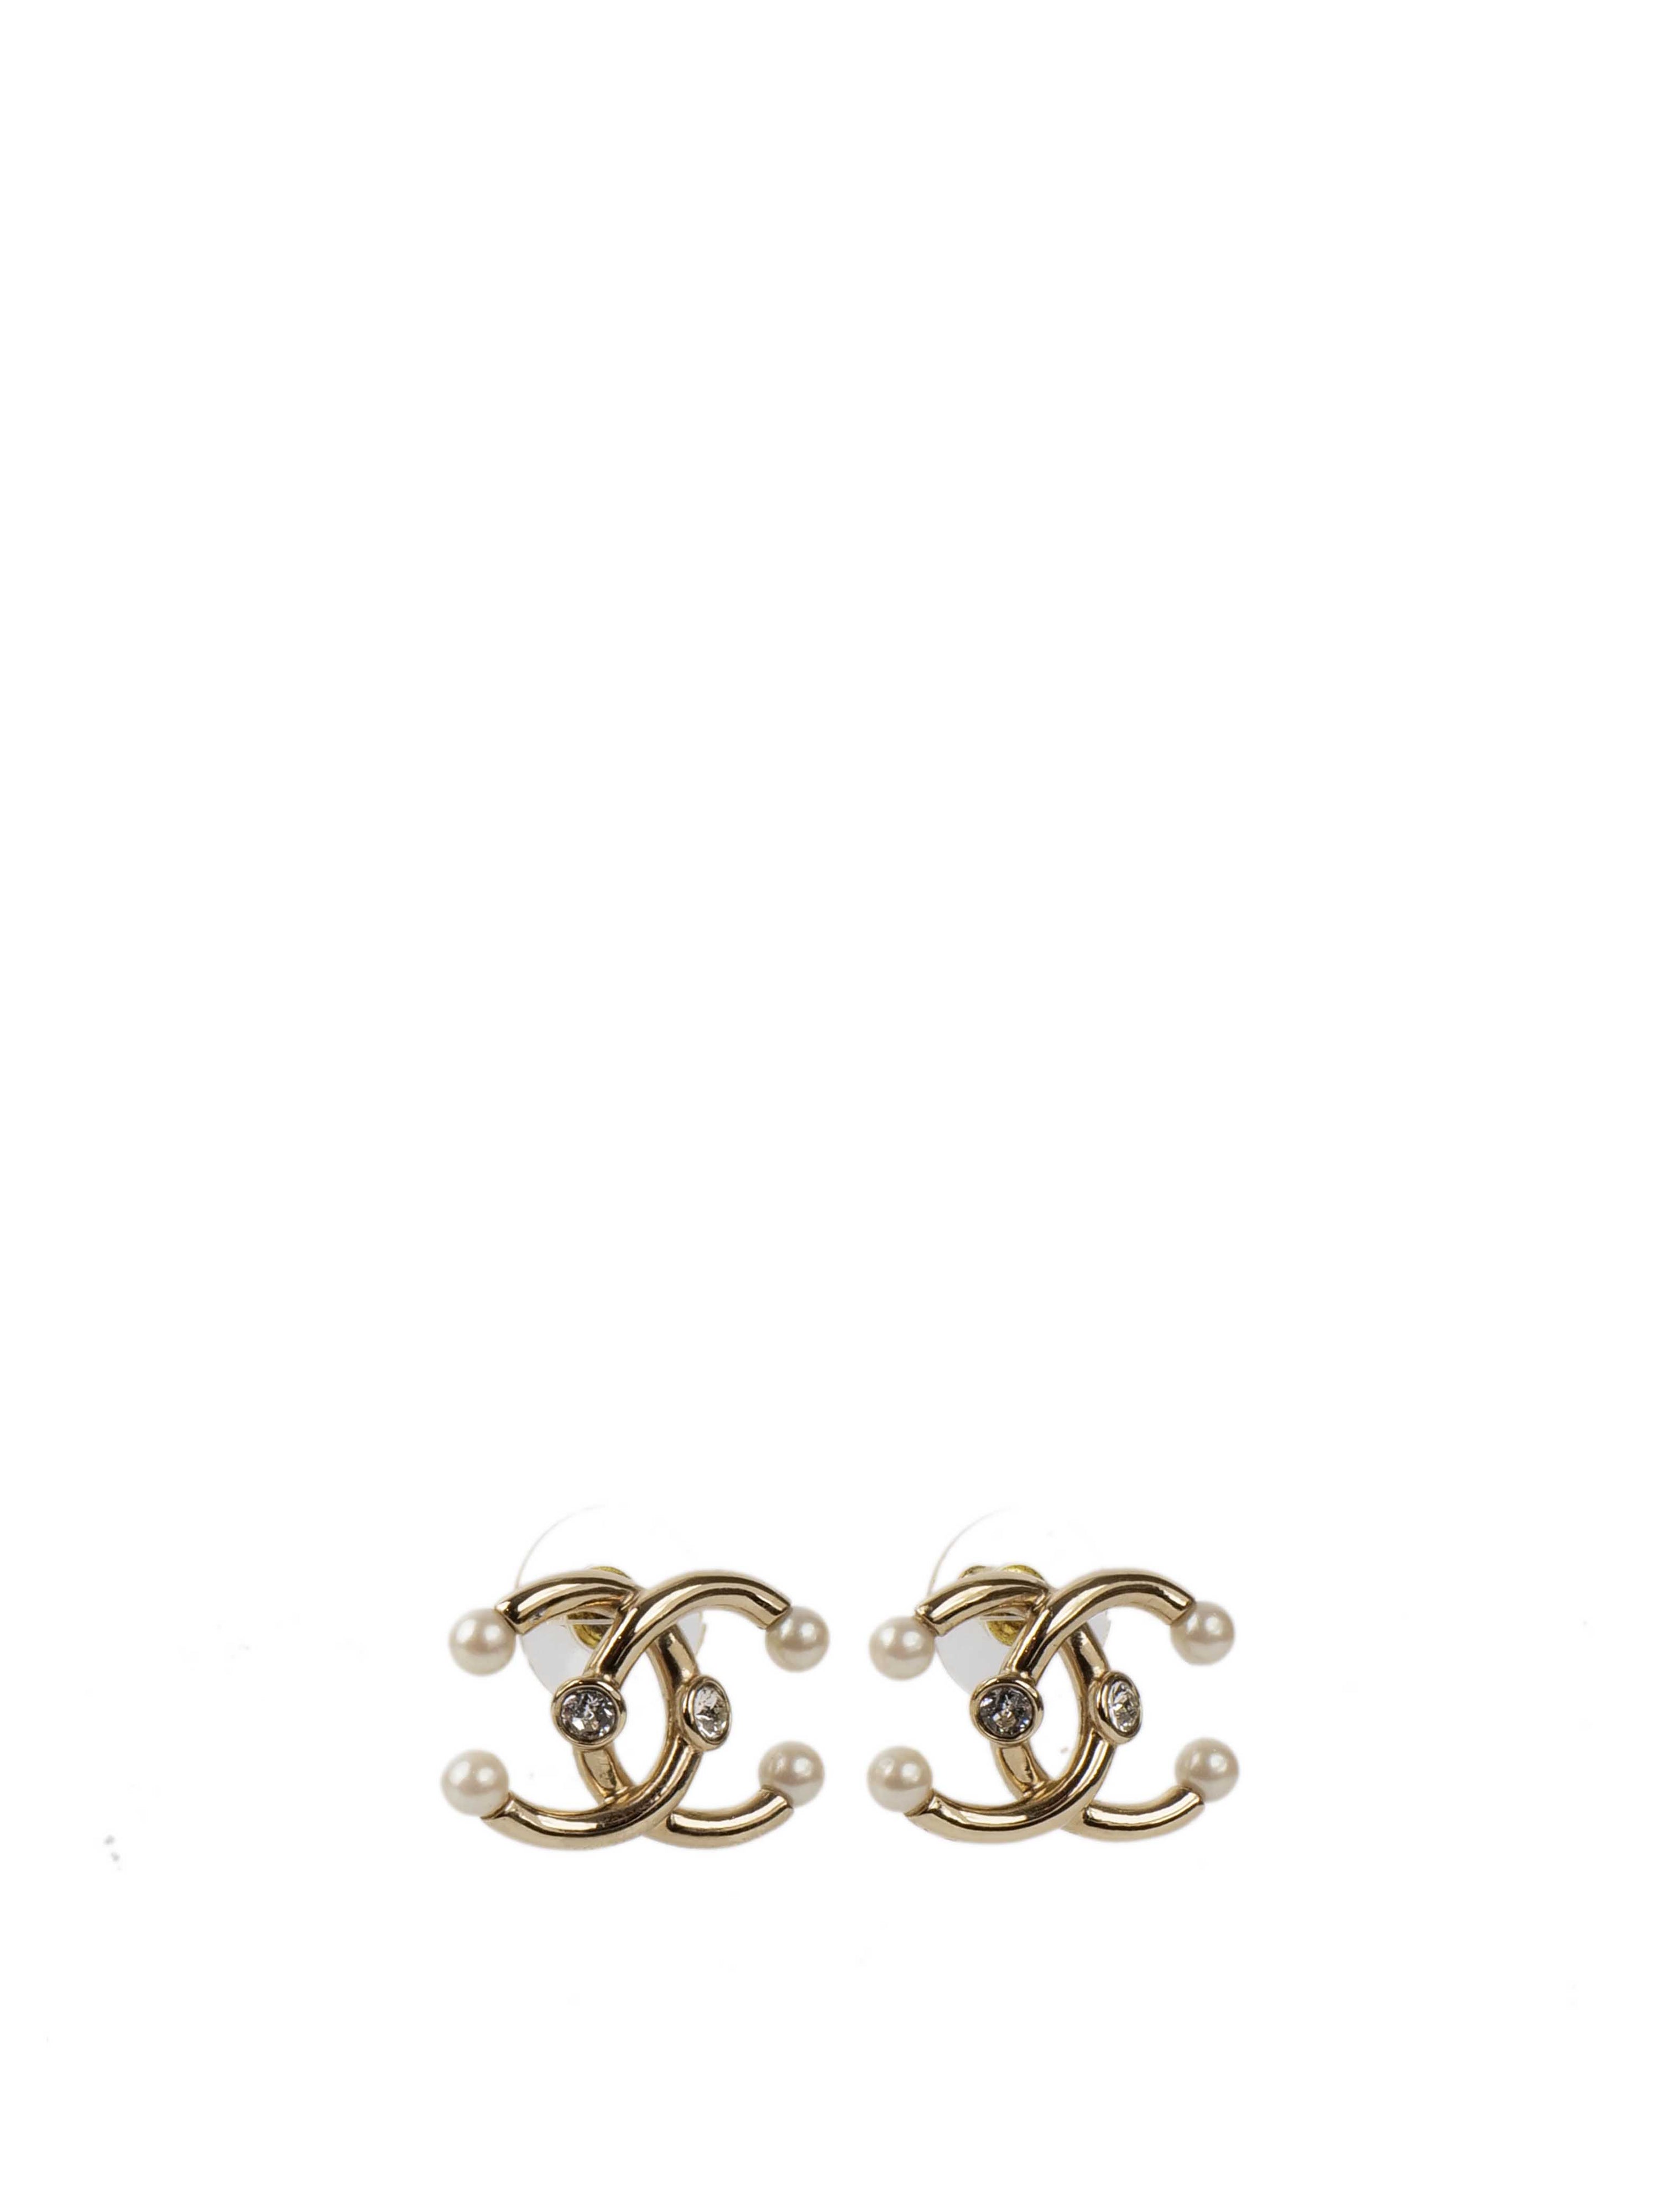 Chanel CC Earrings with Pearls.